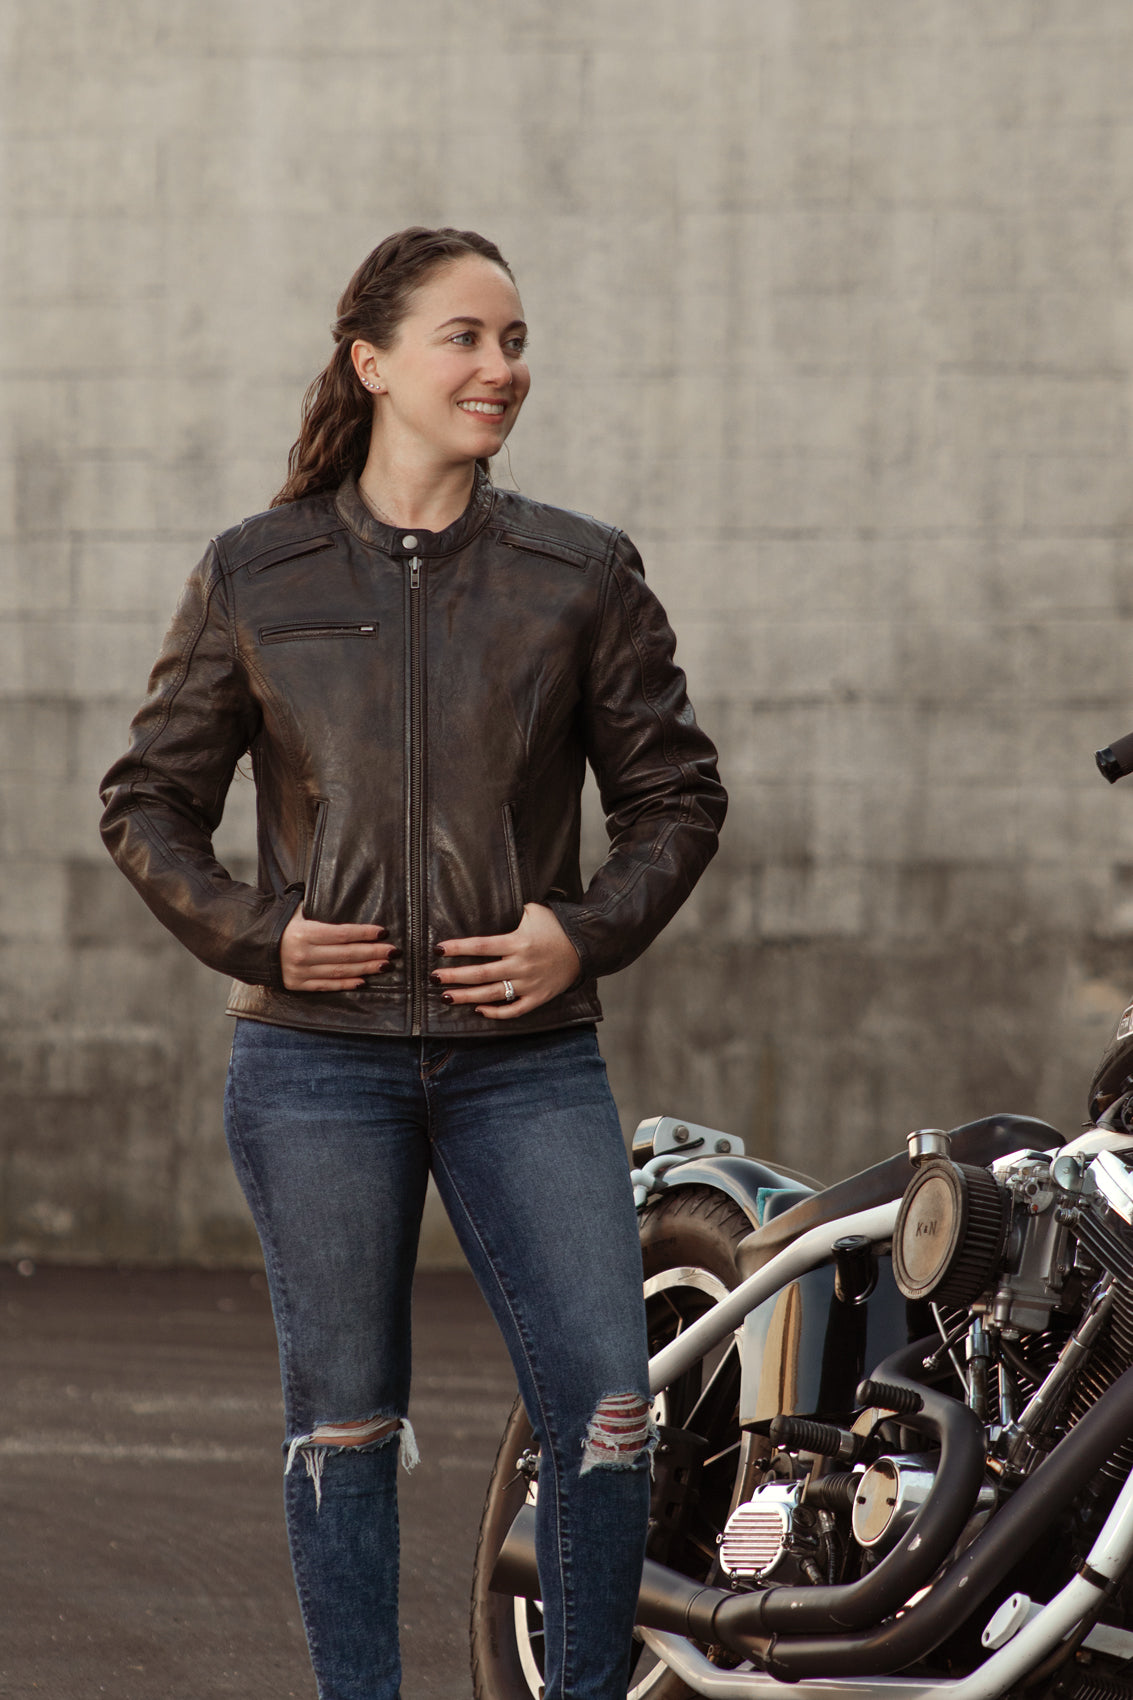 Trickster Womens Motorcycle Leather Jacket Women's Leather Jacket First Manufacturing Company   